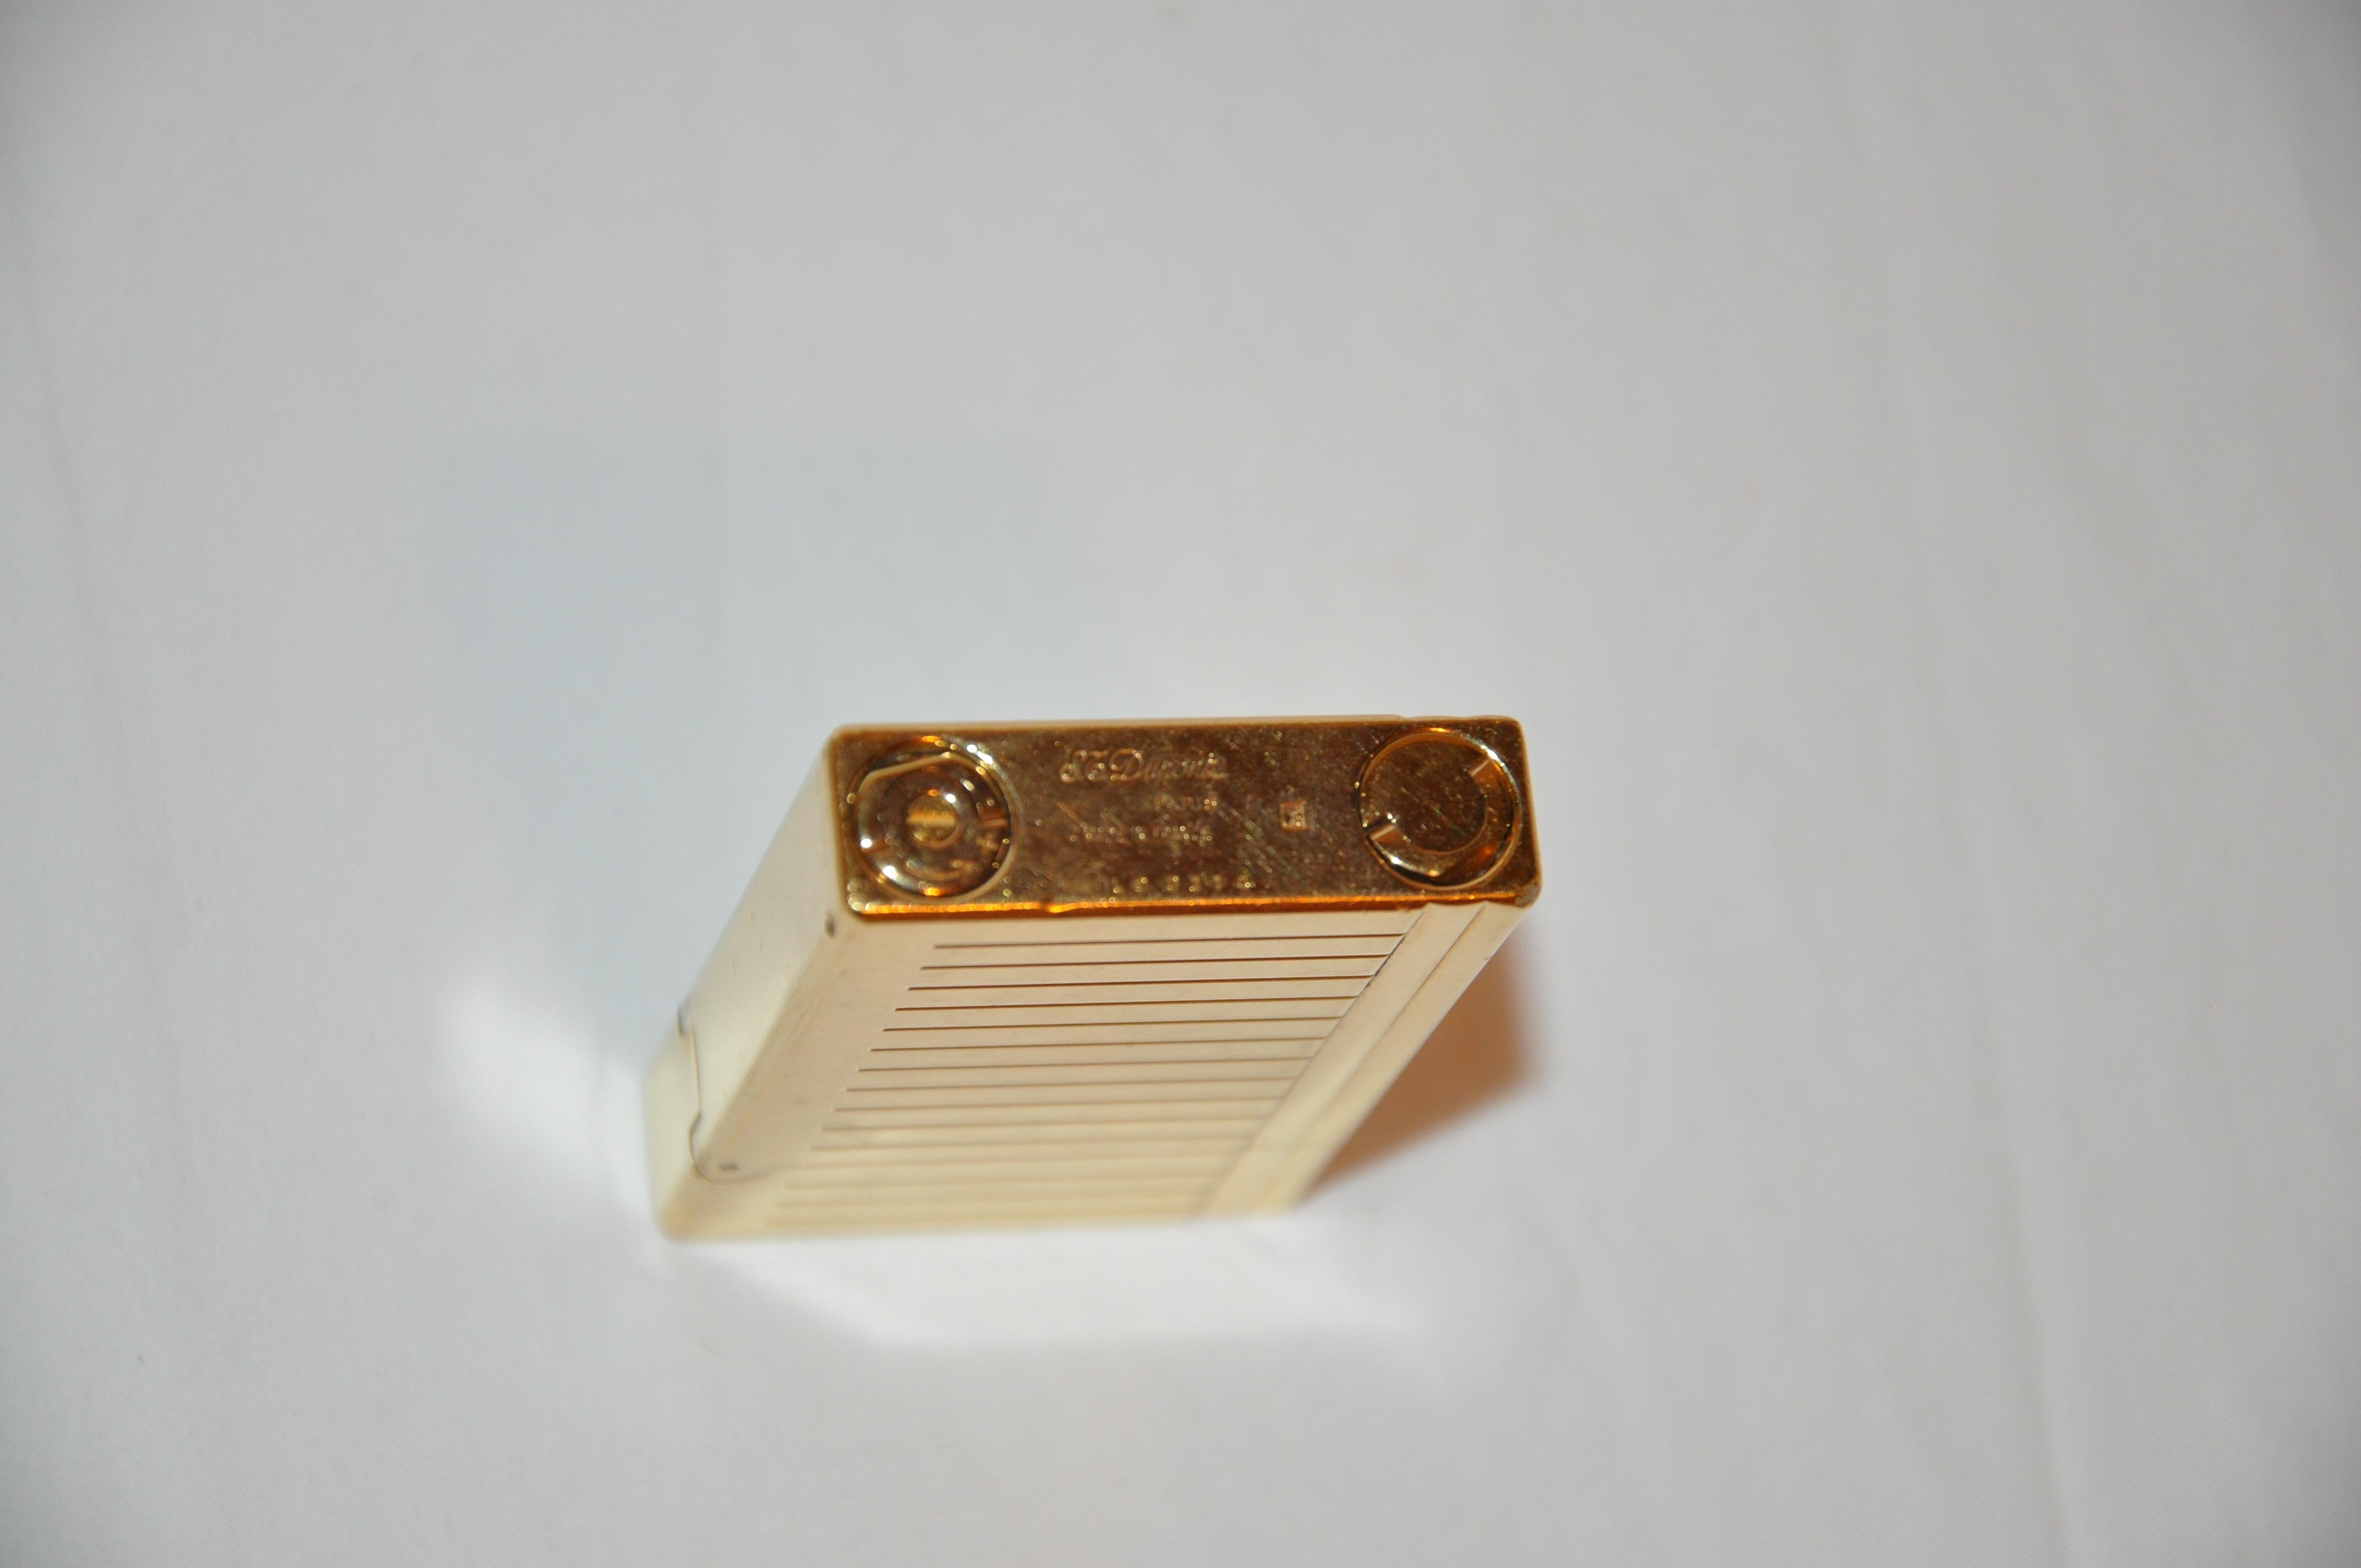 Dupont 18k Yellow Gold Lighter in Original Box In Good Condition For Sale In New York, NY